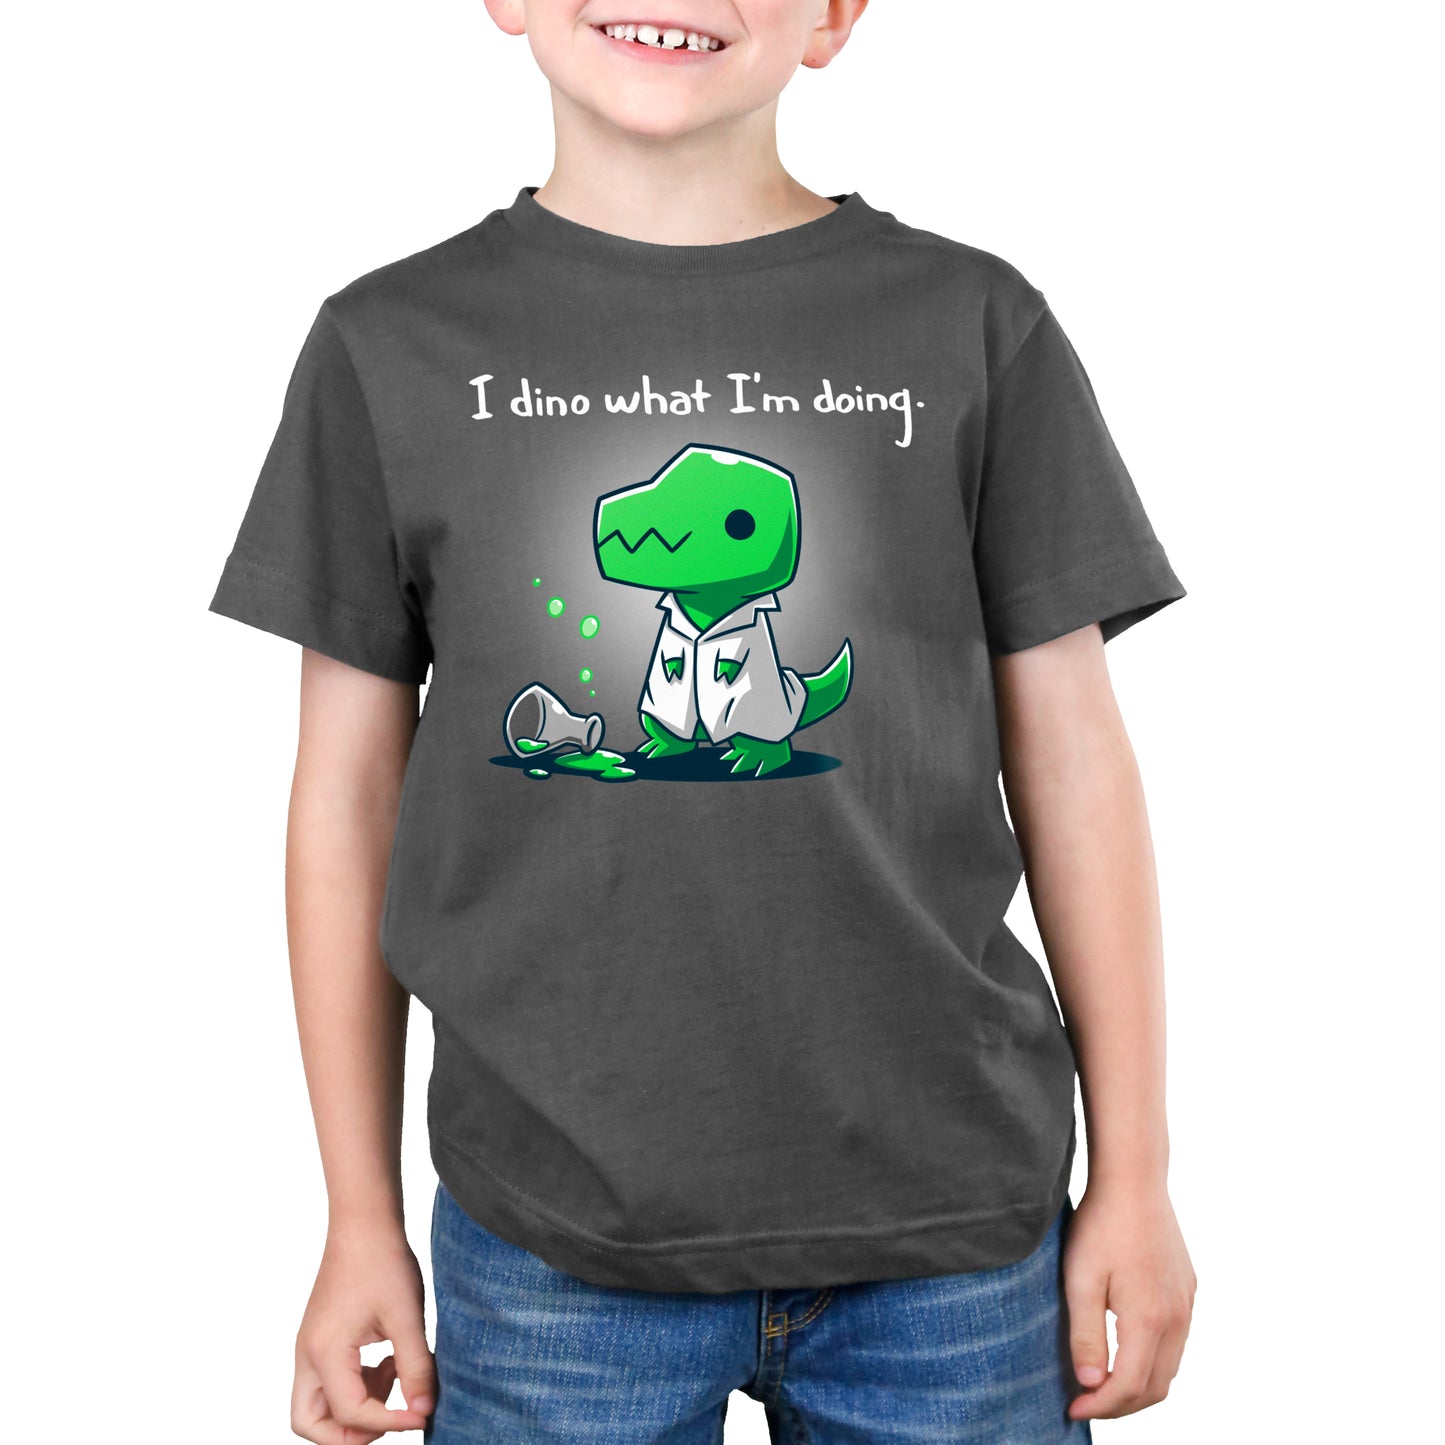 A young boy demonstrating lab safety while wearing a "I Dino What I'm Doing" t-shirt from TeeTurtle.